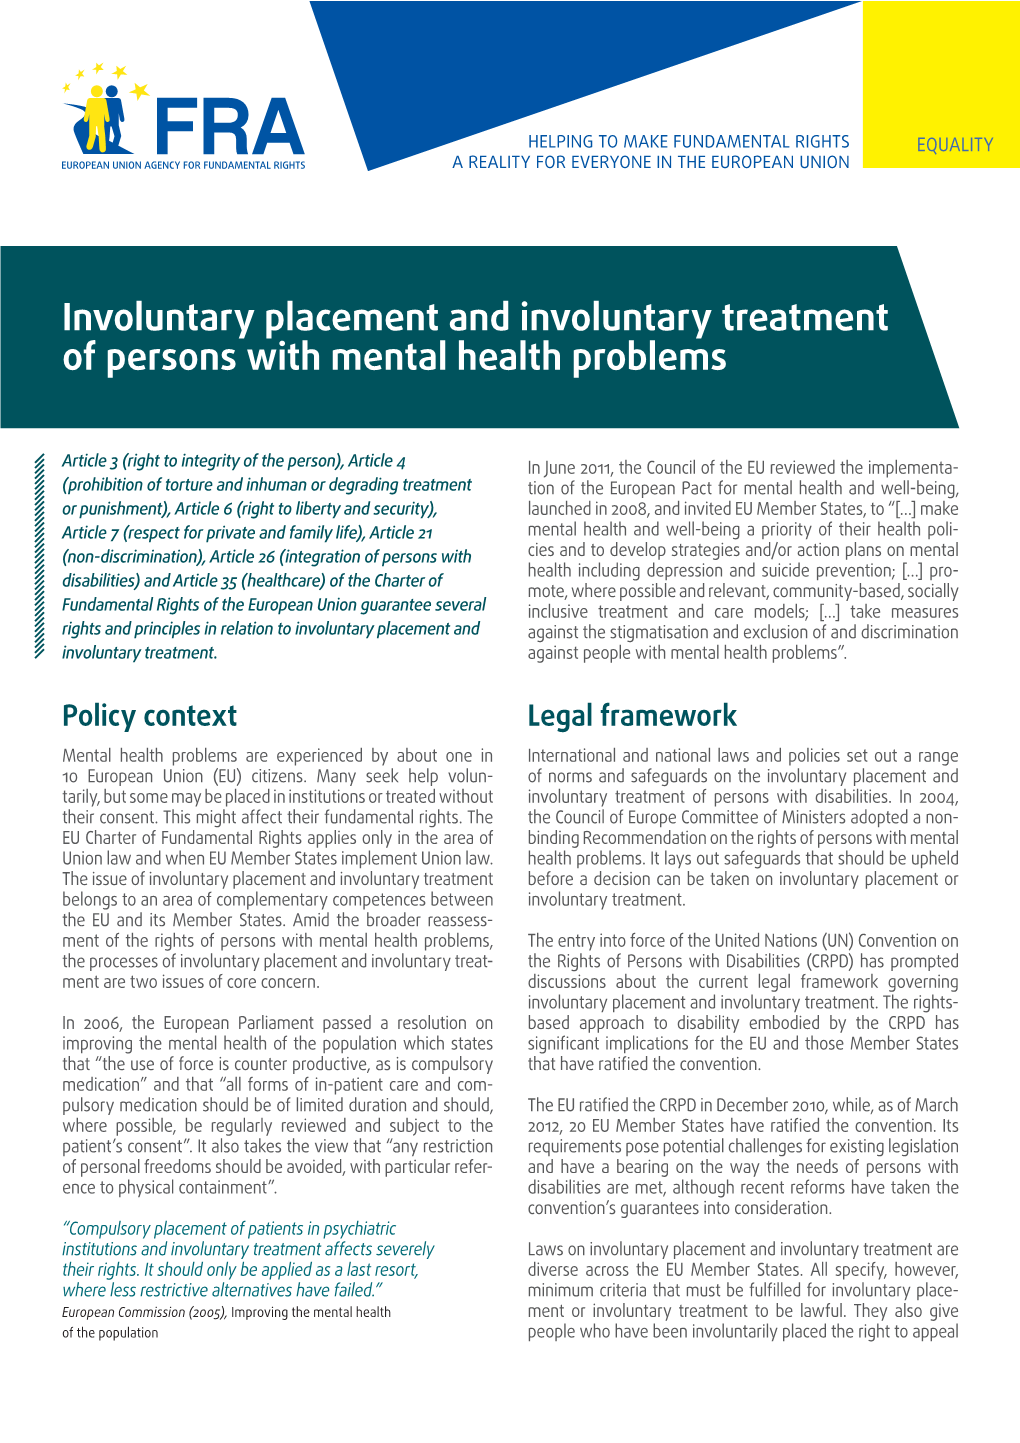 Involuntary Placement and Involuntary Treatment of Persons with Mental Health Problems